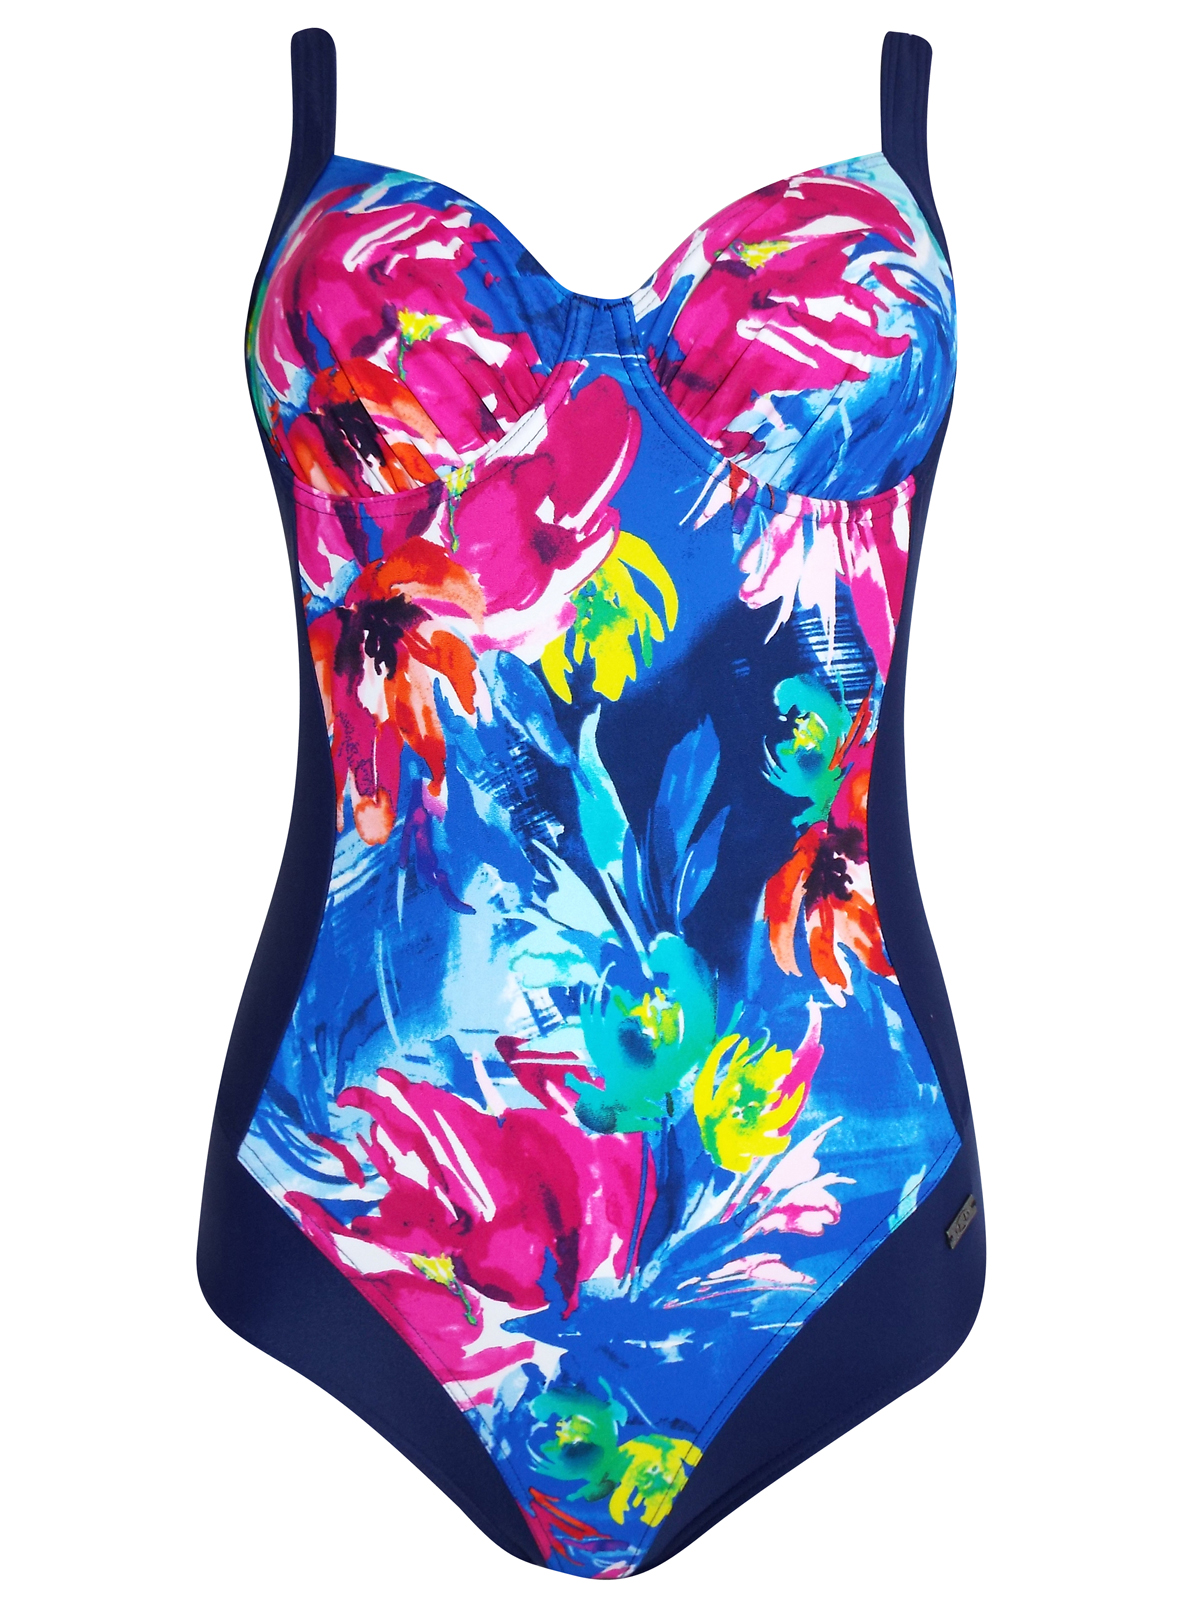 Naturana - - Naturana NAVY Floral Print Underwired Swimsuit - Size 10